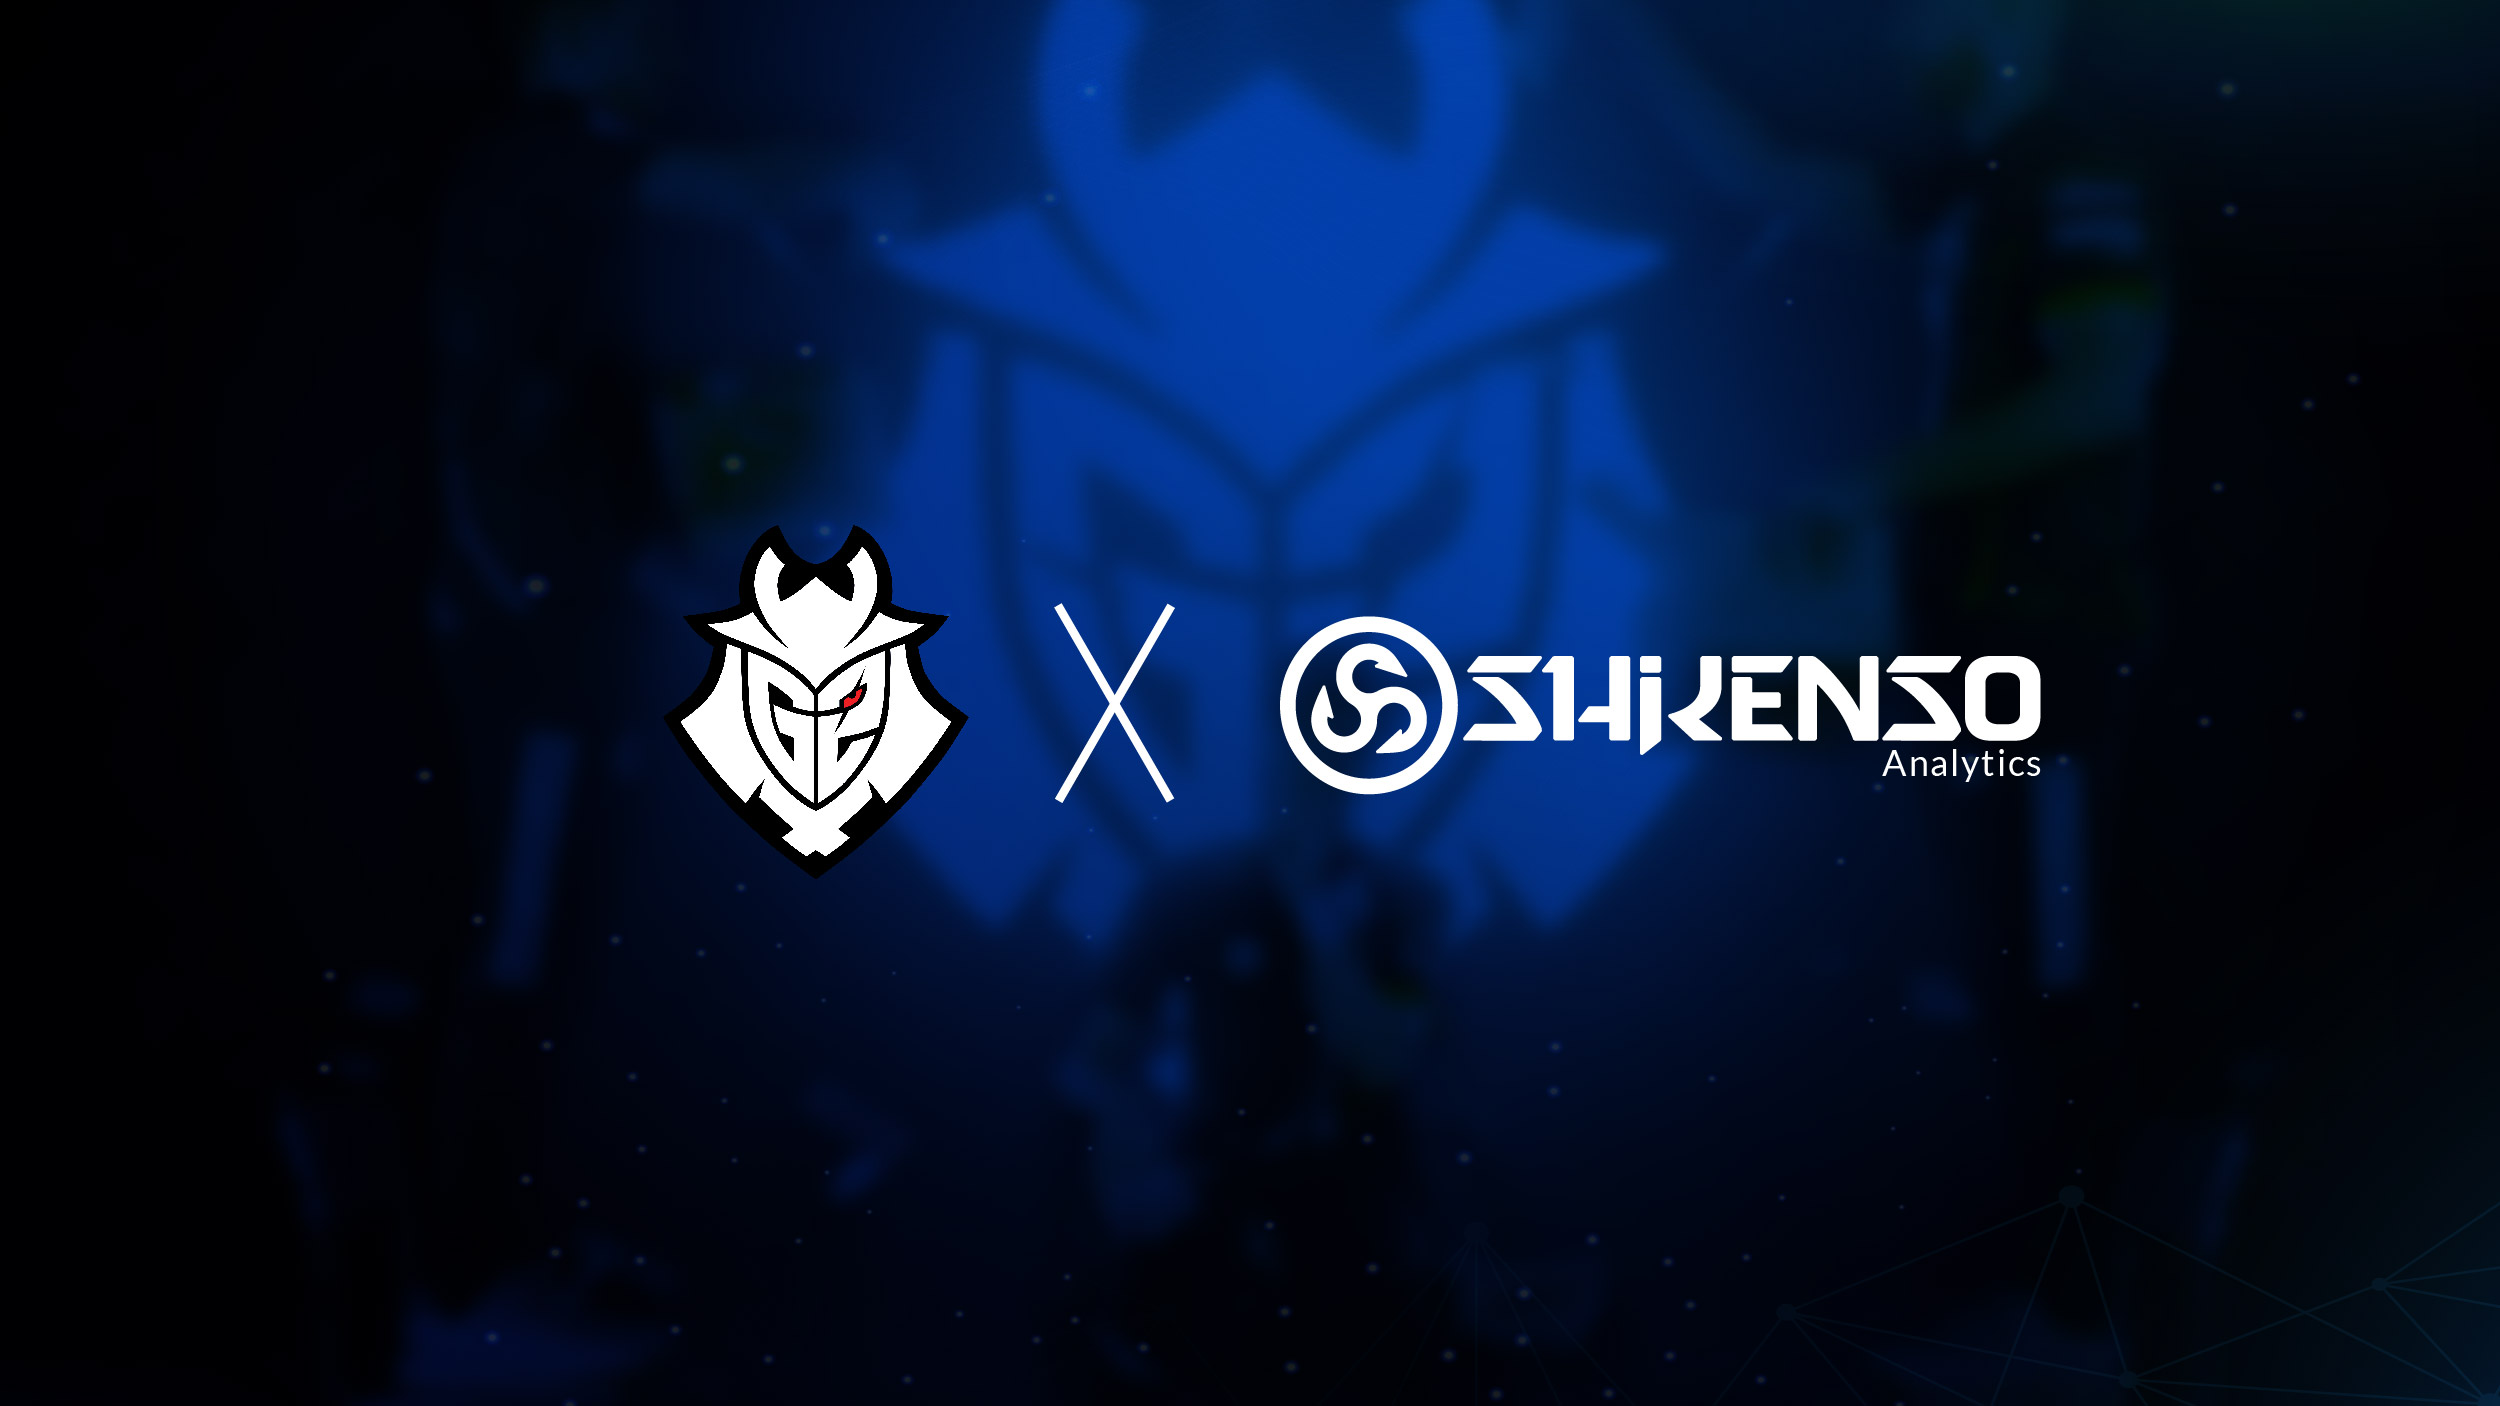 G2 Esports teams up with Shikenso Analytics for partnership performance measurement